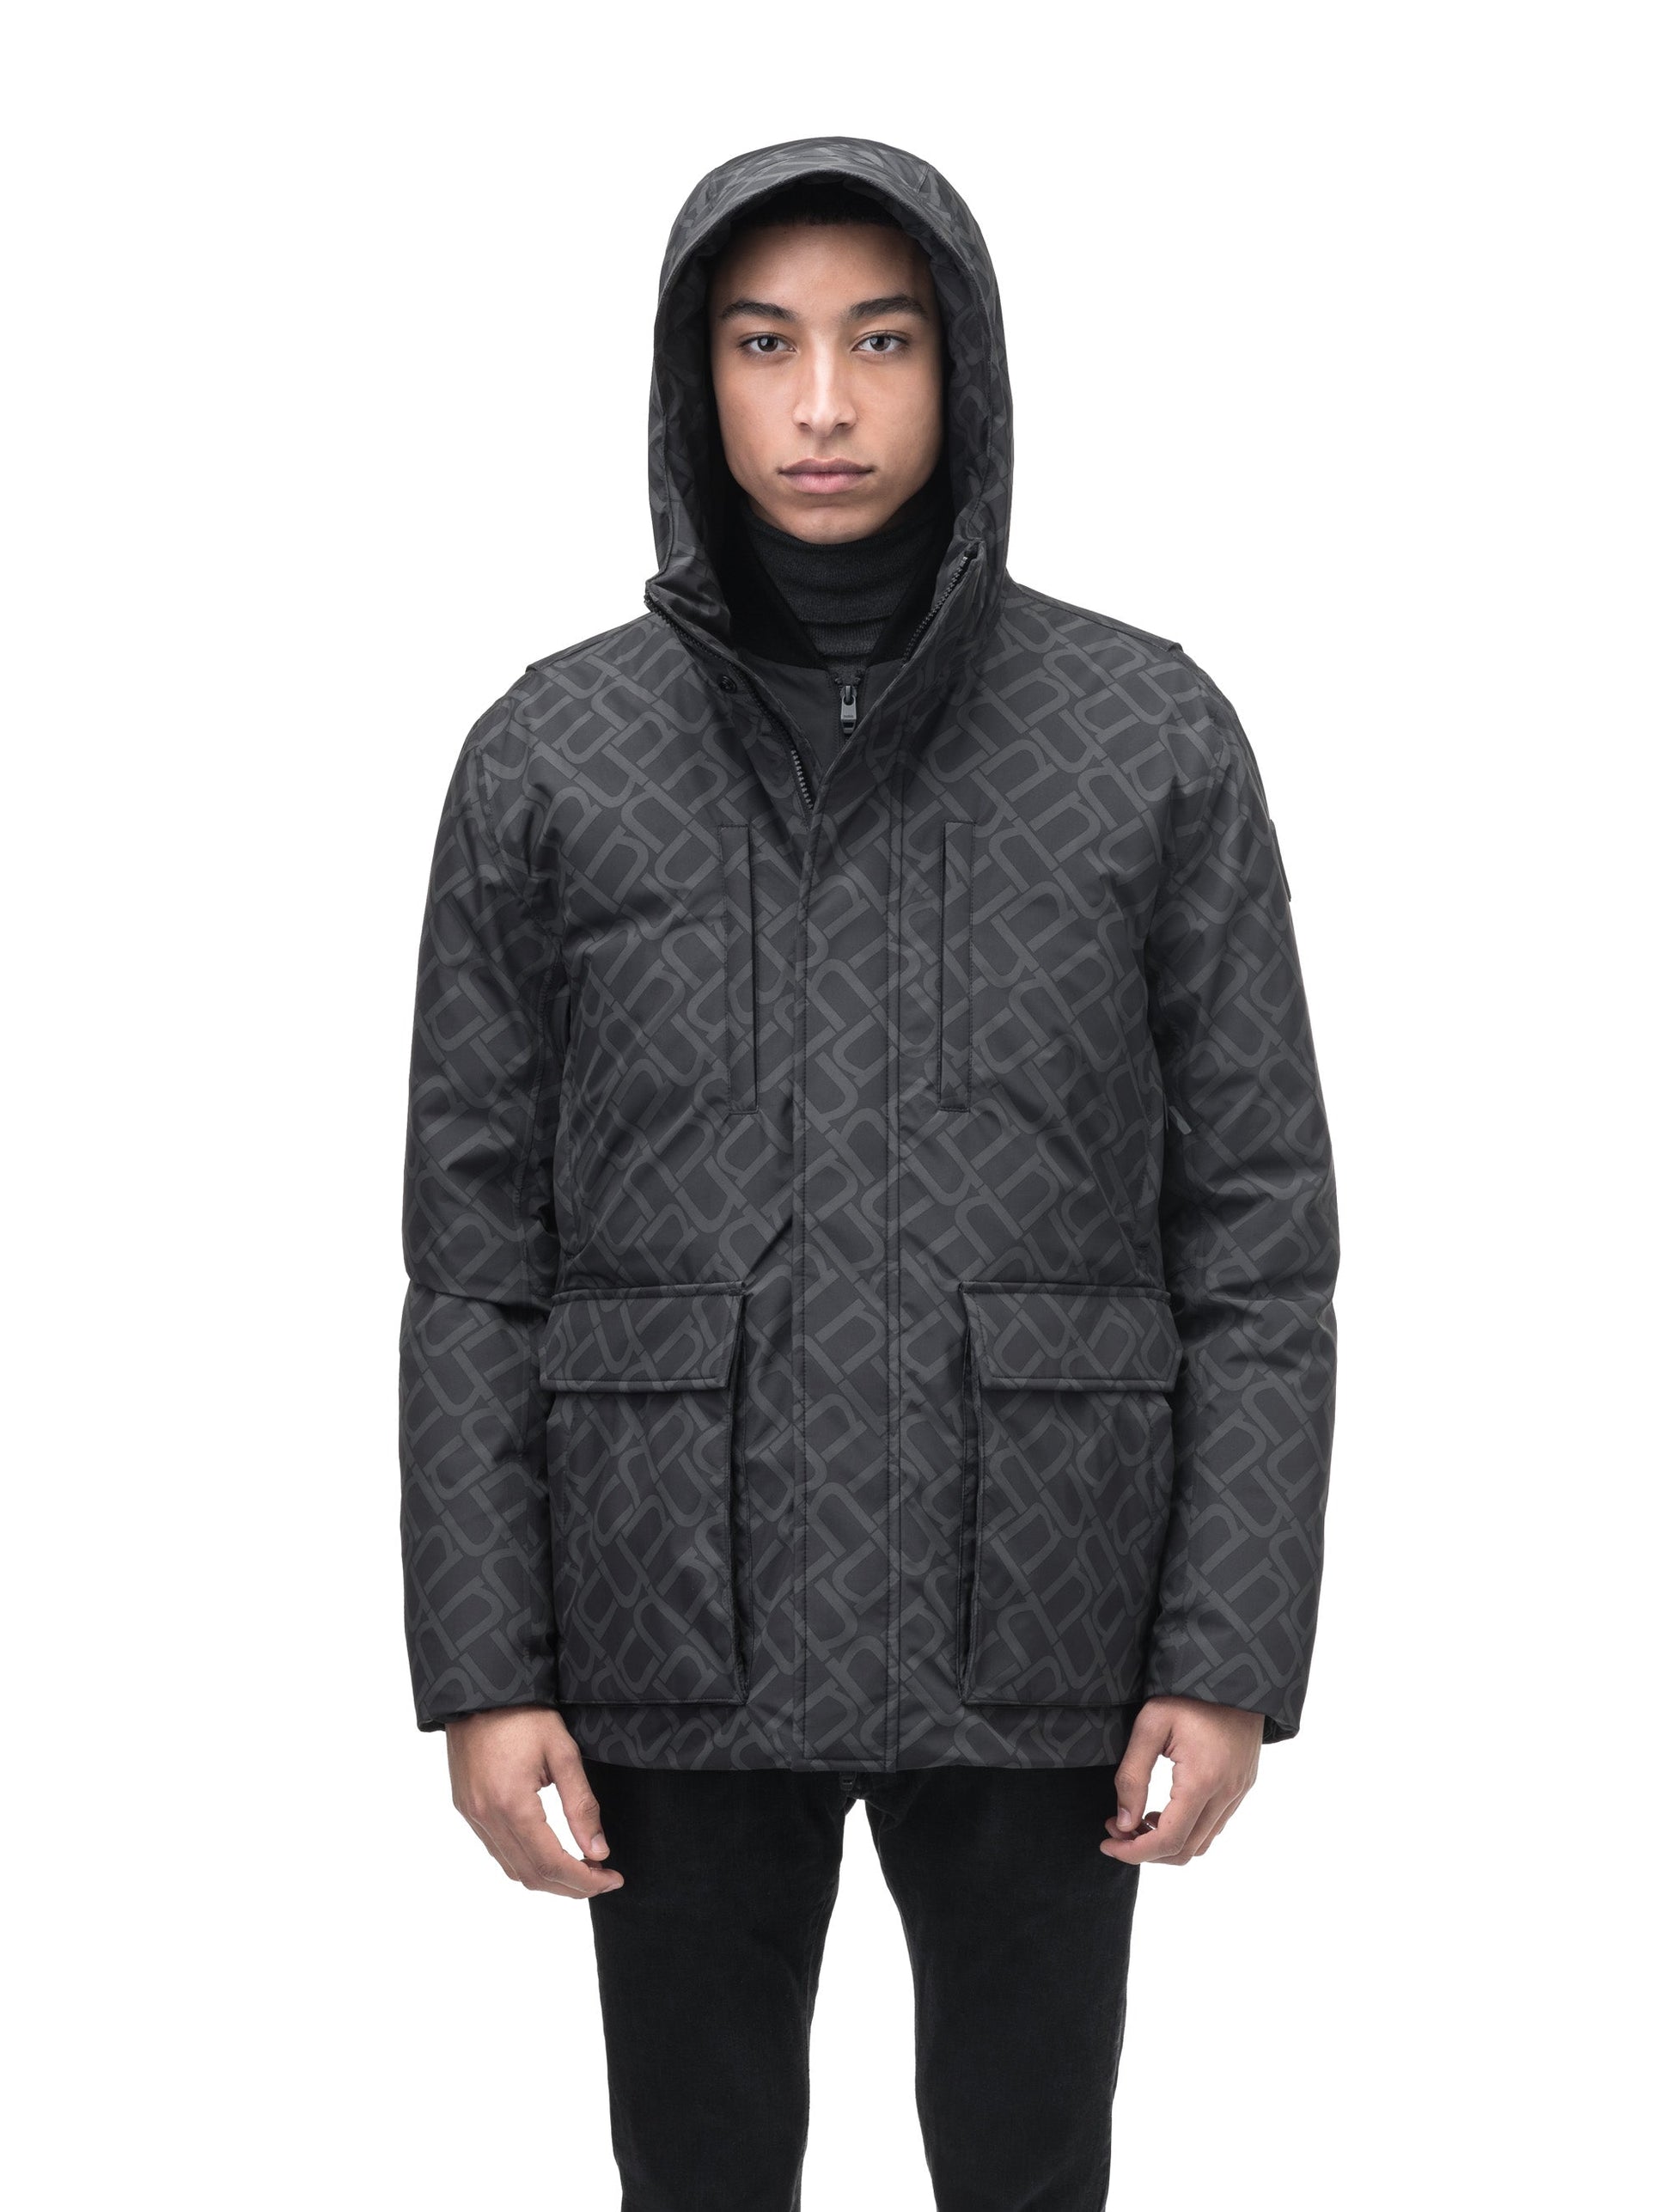 Geo Men's Short Parka in hip length, Canadian duck down insulation, non-removable hood, and two-way zipper, in Dark Monogram